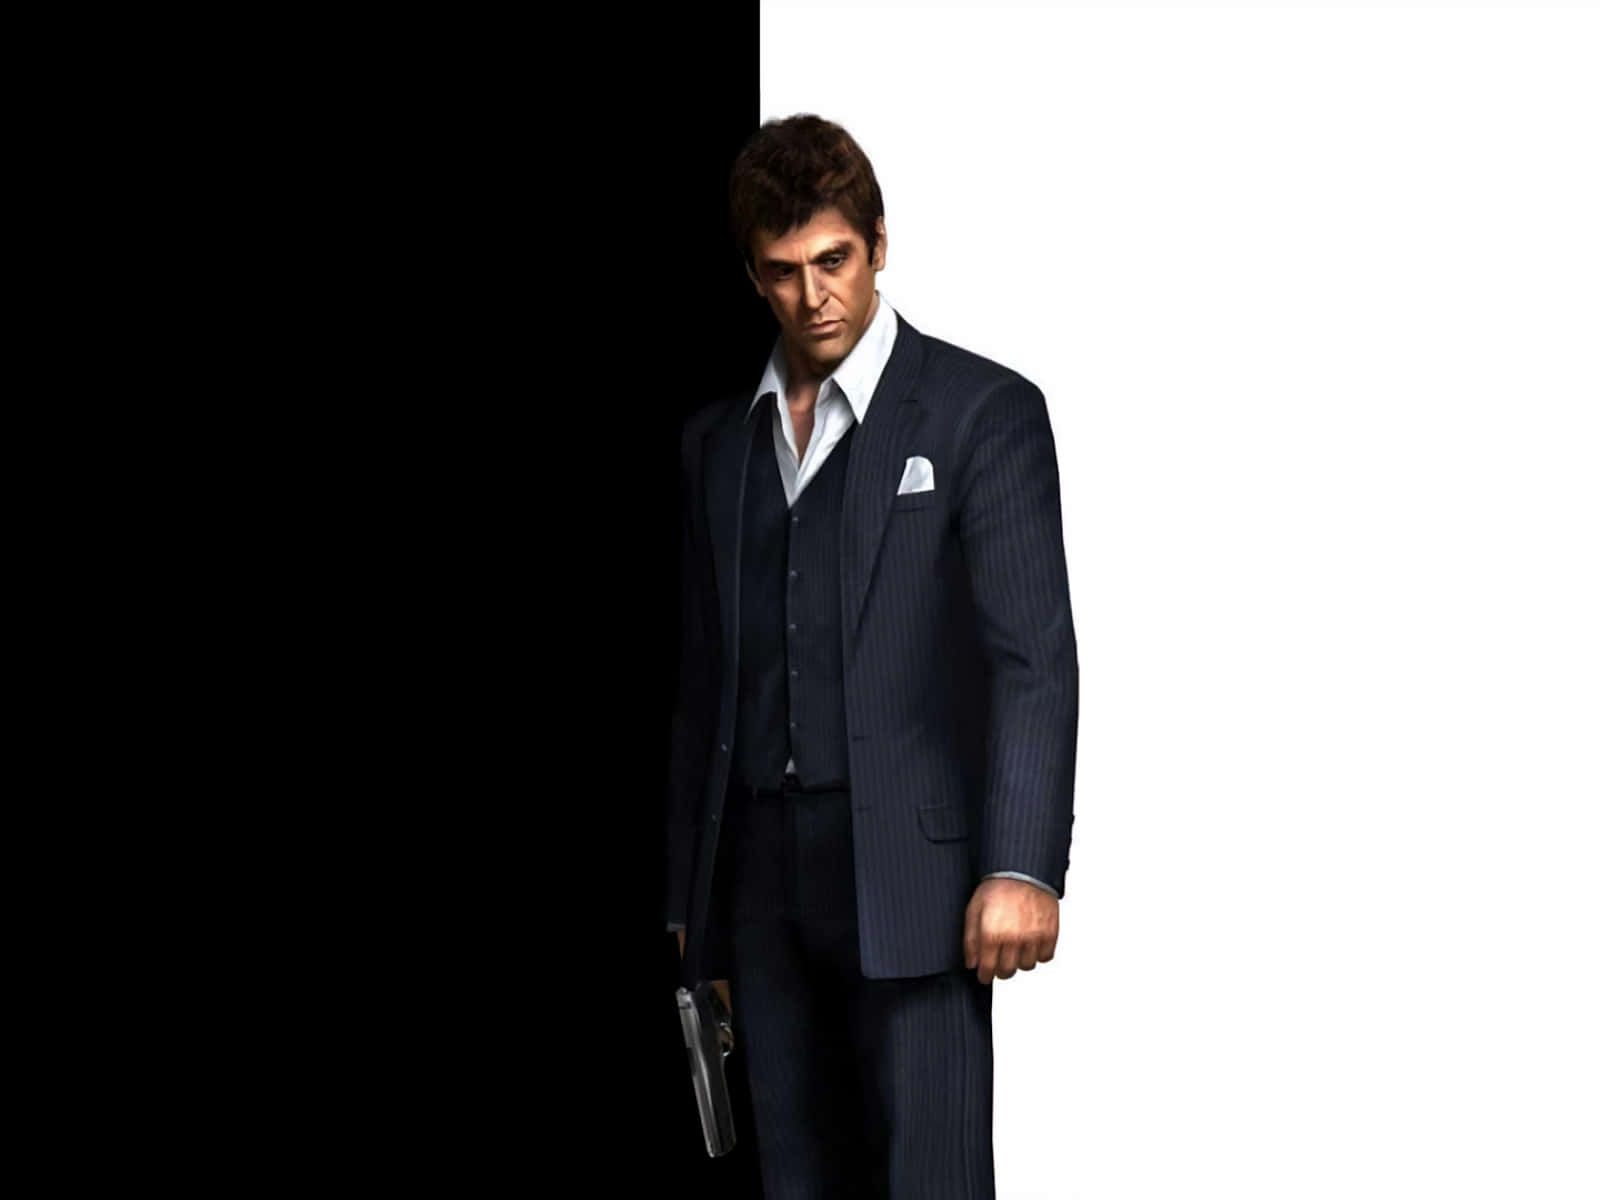 Tony Montana Stands Between Violence And Determination